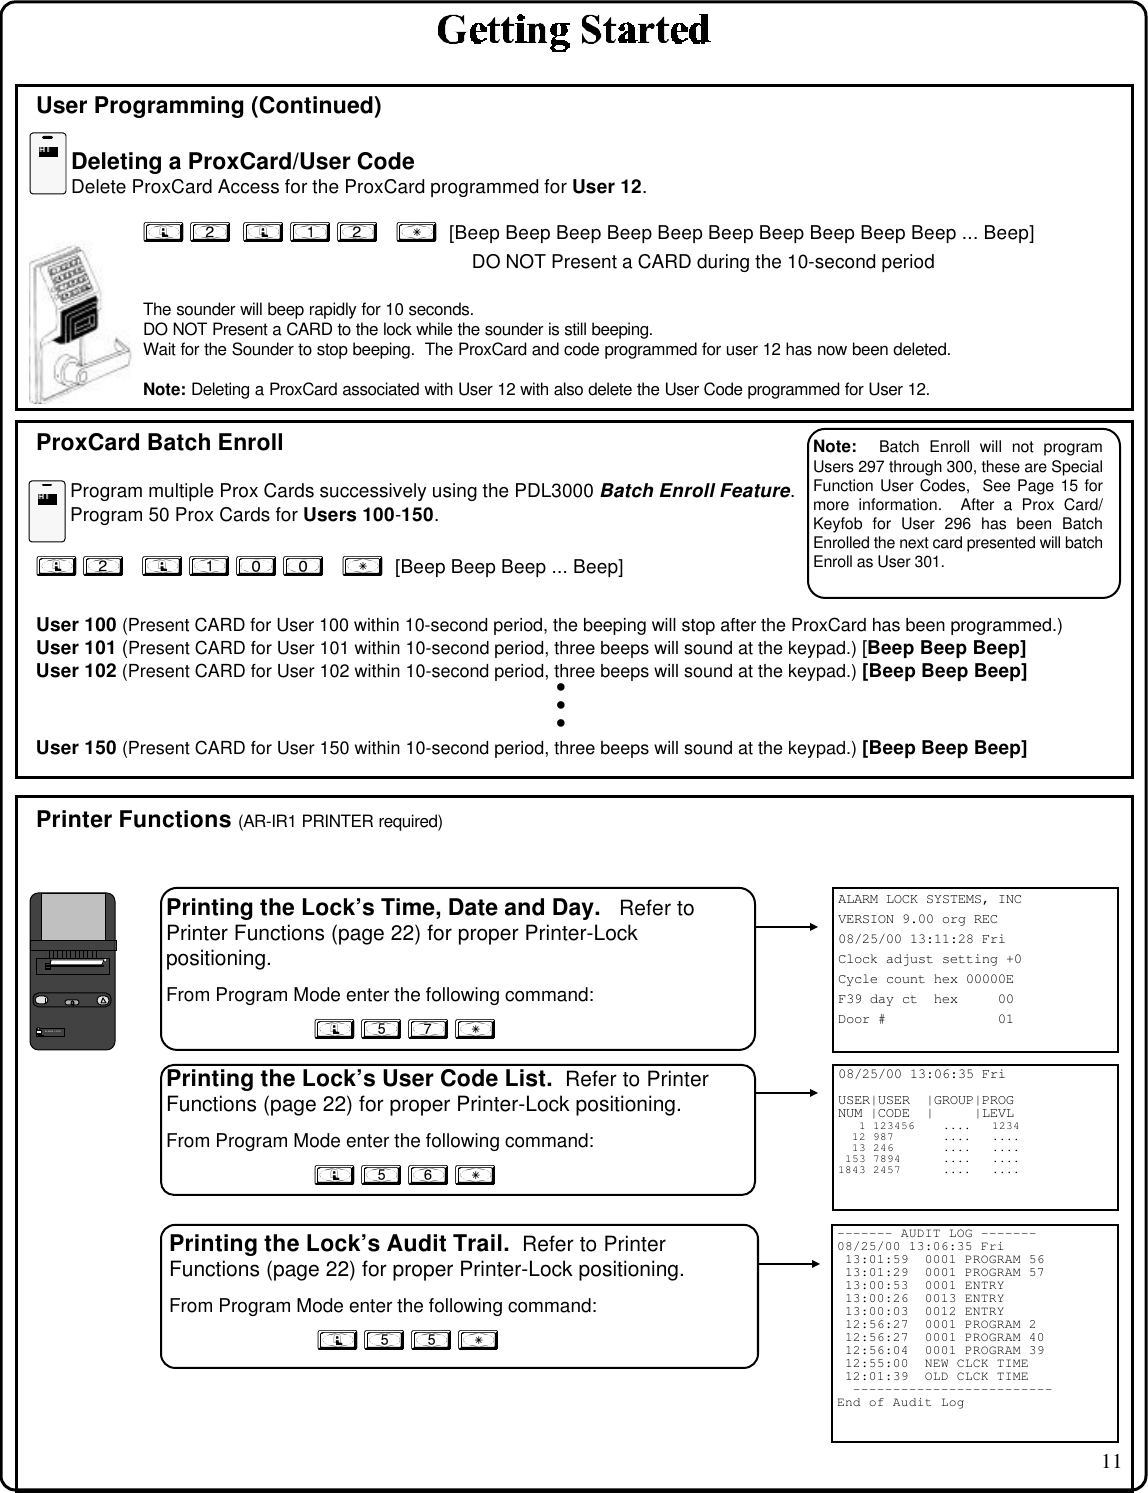 11ALARM LOCK SYSTEMS, INCVERSION 9.00 org REC08/25/00 13:11:28 FriClock adjust setting +0Cycle count hex 00000EF39 day ct  hex     00Door #              01Printing the Lock’s Time, Date and Day.   Refer toPrinter Functions (page 22) for proper Printer-Lockpositioning.From Program Mode enter the following command:; 5 7 :User Programming (Continued)Deleting a ProxCard/User CodeDelete ProxCard Access for the ProxCard programmed for User 12.; 2  ; 1 2   :  [Beep Beep Beep Beep Beep Beep Beep Beep Beep Beep ... Beep]             DO NOT Present a CARD during the 10-second periodThe sounder will beep rapidly for 10 seconds.DO NOT Present a CARD to the lock while the sounder is still beeping.Wait for the Sounder to stop beeping.  The ProxCard and code programmed for user 12 has now been deleted.Note: Deleting a ProxCard associated with User 12 with also delete the User Code programmed for User 12.ProxCard Batch EnrollProgram multiple Prox Cards successively using the PDL3000 Batch Enroll Feature.Program 50 Prox Cards for Users 100-150.; 2   ; 1 0 0   :  [Beep Beep Beep ... Beep]User 100 (Present CARD for User 100 within 10-second period, the beeping will stop after the ProxCard has been programmed.)User 101 (Present CARD for User 101 within 10-second period, three beeps will sound at the keypad.) [Beep Beep Beep]User 102 (Present CARD for User 102 within 10-second period, three beeps will sound at the keypad.) [Beep Beep Beep]• • • User 150 (Present CARD for User 150 within 10-second period, three beeps will sound at the keypad.) [Beep Beep Beep]Printer Functions (AR-IR1 PRINTER required)08/25/00 13:06:35 FriUSER|USER  |GROUP|PROGNUM |CODE  |     |LEVL   1 123456    ....   1234  12 987       ....   ....  13 246       ....   .... 153 7894      ....   ....1843 2457      ....   ....Printing the Lock’s User Code List.  Refer to PrinterFunctions (page 22) for proper Printer-Lock positioning.From Program Mode enter the following command:; 5 6 :Printing the Lock’s Audit Trail.  Refer to PrinterFunctions (page 22) for proper Printer-Lock positioning.From Program Mode enter the following command:; 5 5 :ALARM LOCK------- AUDIT LOG -------08/25/00 13:06:35 Fri 13:01:59  0001 PROGRAM 56 13:01:29  0001 PROGRAM 57 13:00:53  0001 ENTRY 13:00:26  0013 ENTRY 13:00:03  0012 ENTRY 12:56:27  0001 PROGRAM 2 12:56:27  0001 PROGRAM 40 12:56:04  0001 PROGRAM 39 12:55:00  NEW CLCK TIME 12:01:39  OLD CLCK TIME  -------------------------End of Audit LogHIHIHIHINote:  Batch Enroll will not programUsers 297 through 300, these are SpecialFunction User Codes,  See Page 15 formore information.  After a Prox Card/Keyfob for User 296 has been BatchEnrolled the next card presented will batchEnroll as User 301.